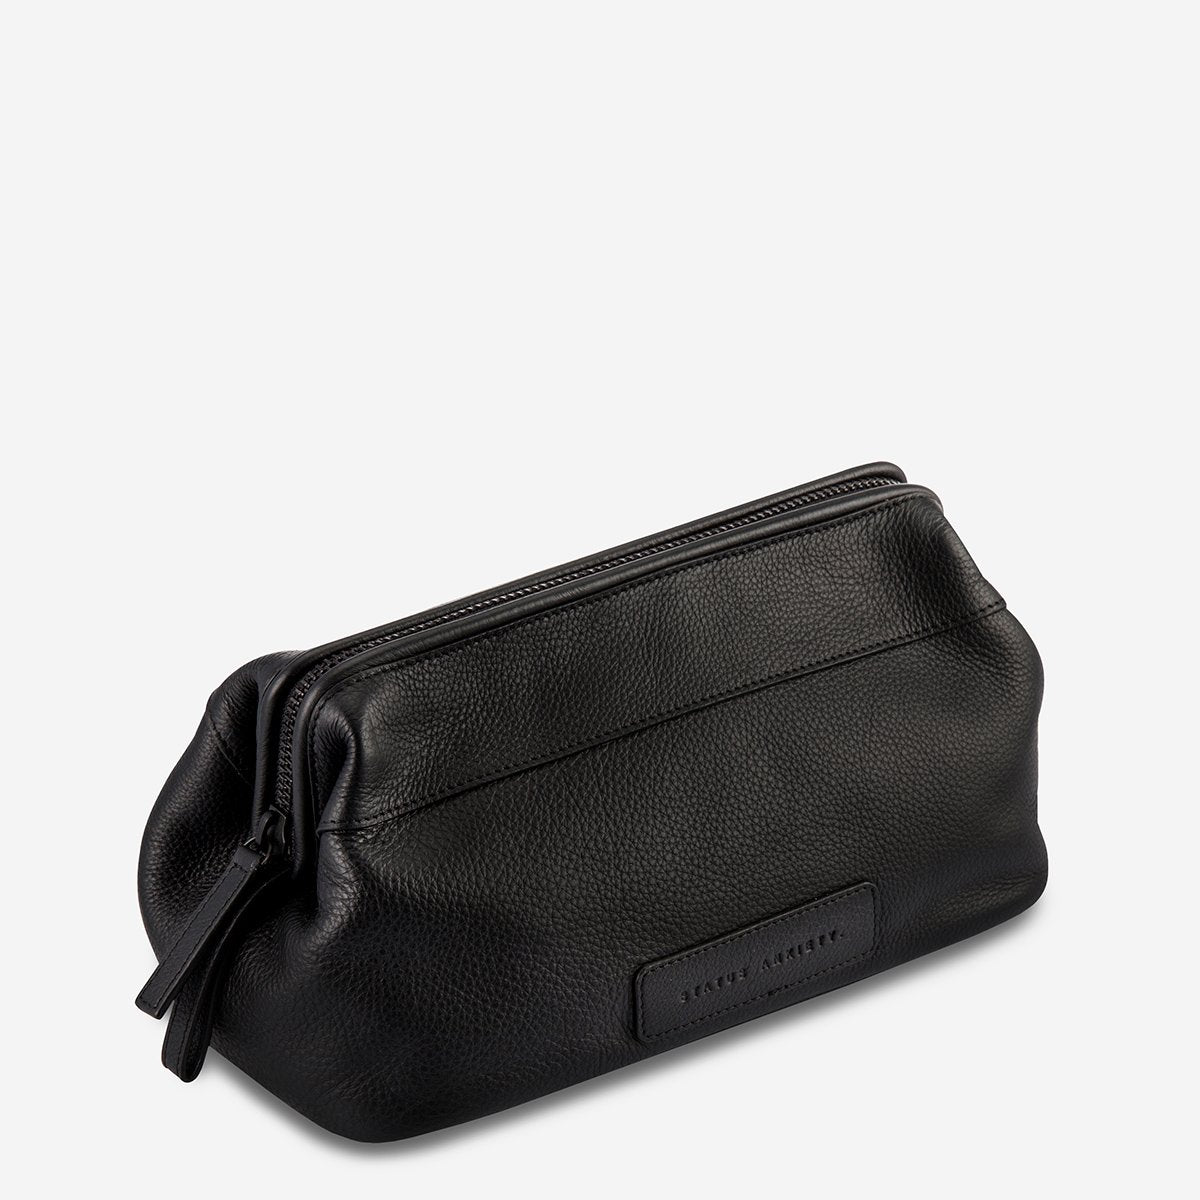 Liability Toiletries Bag - MOSS AND WILD